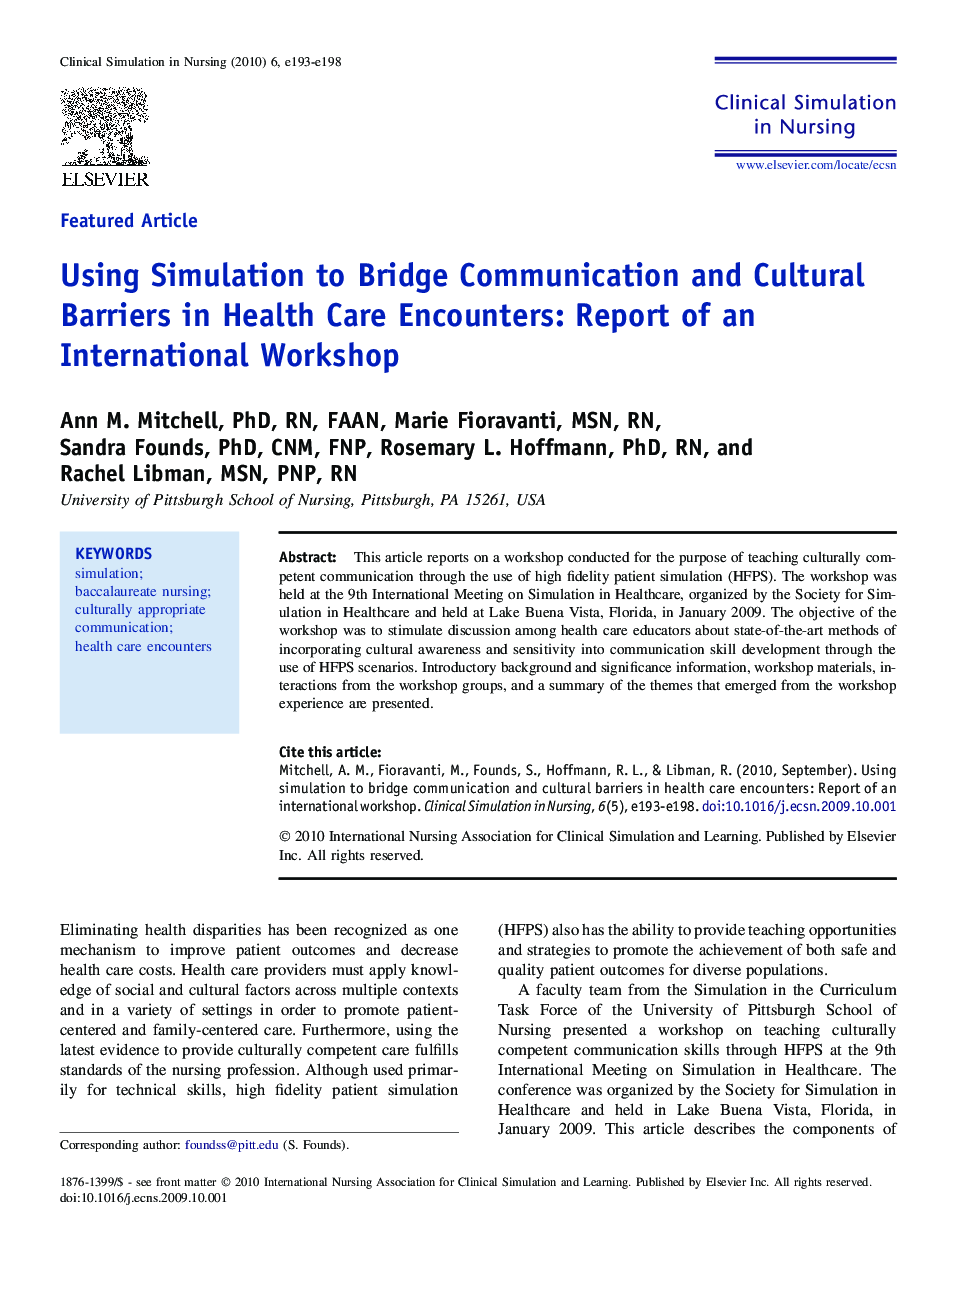 Using Simulation to Bridge Communication and Cultural Barriers in Health Care Encounters: Report of an International Workshop 